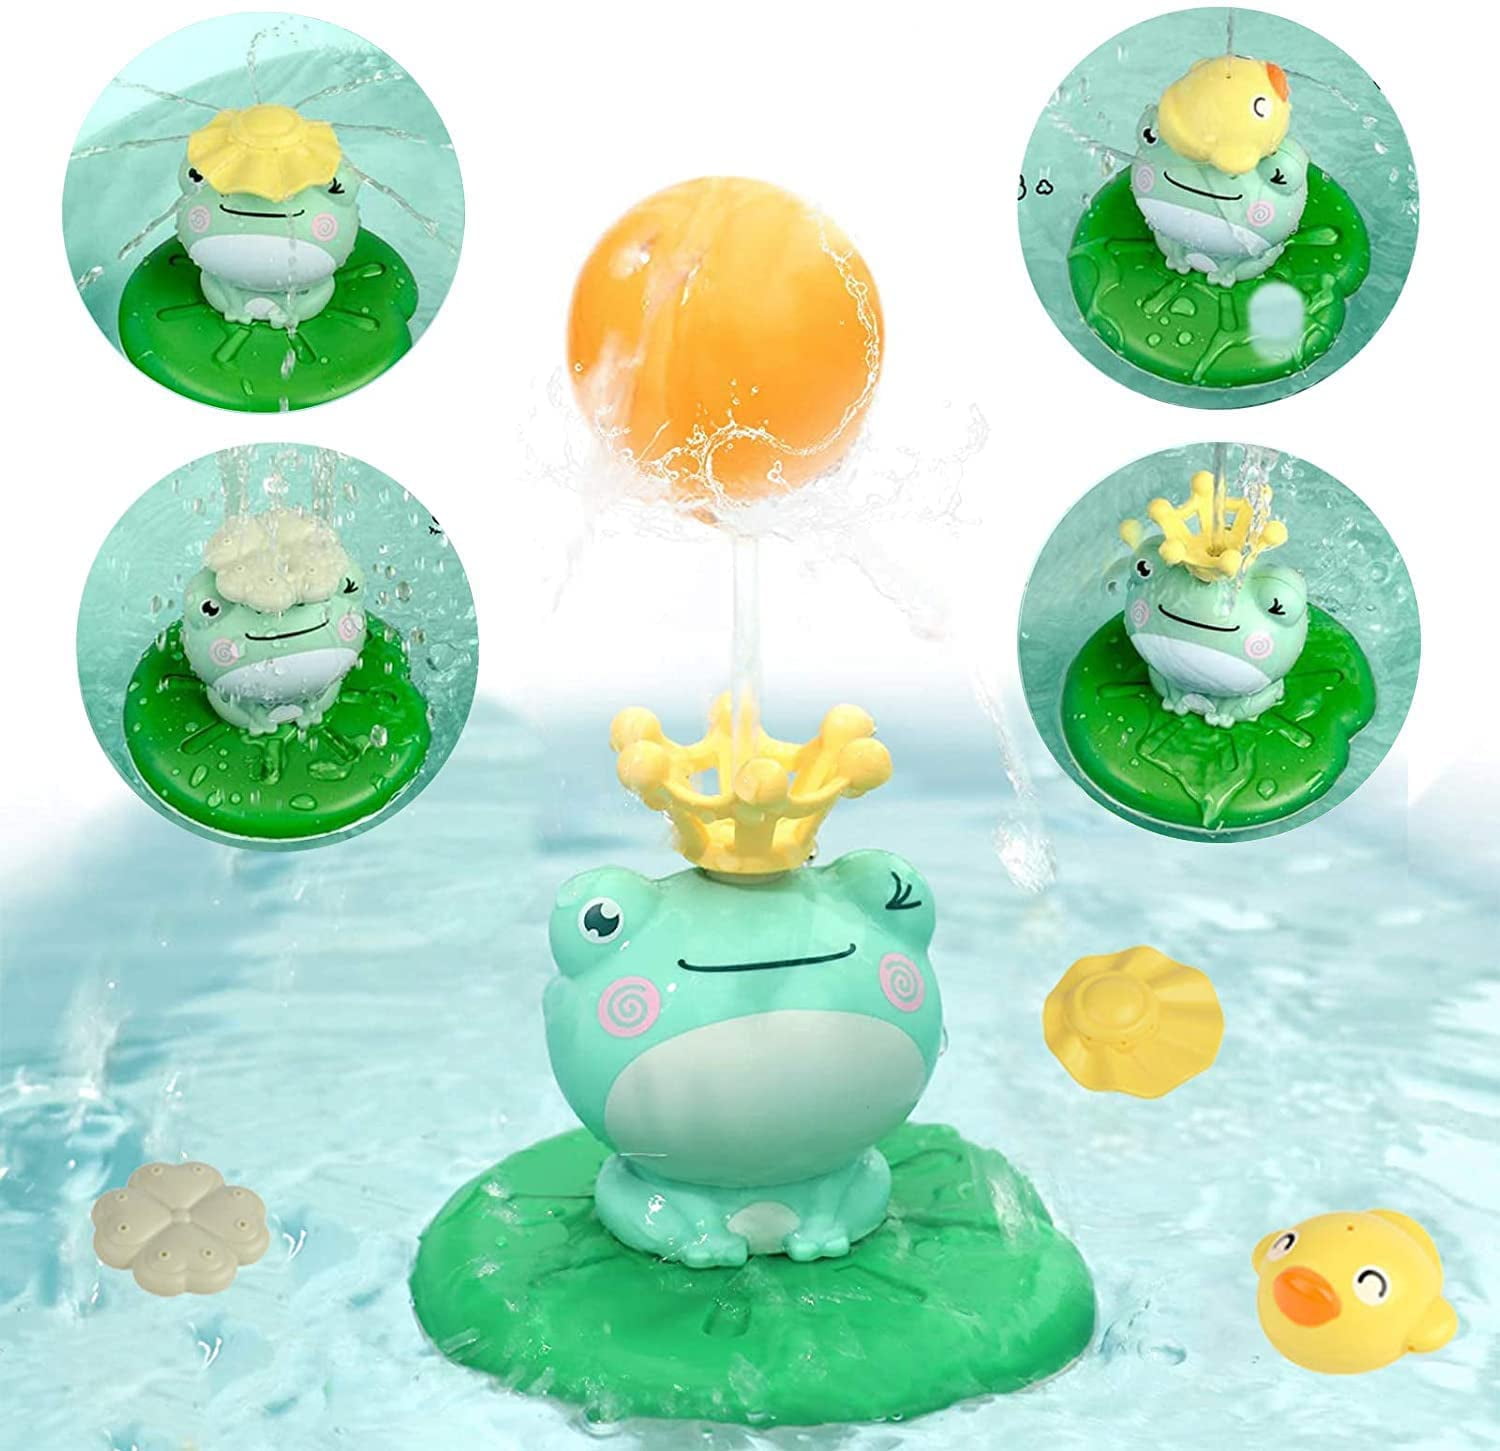 Fun Frog Baby Bath Toy Shower Spray Water Bathtub Spin Wall Toy For Toddler  Kids